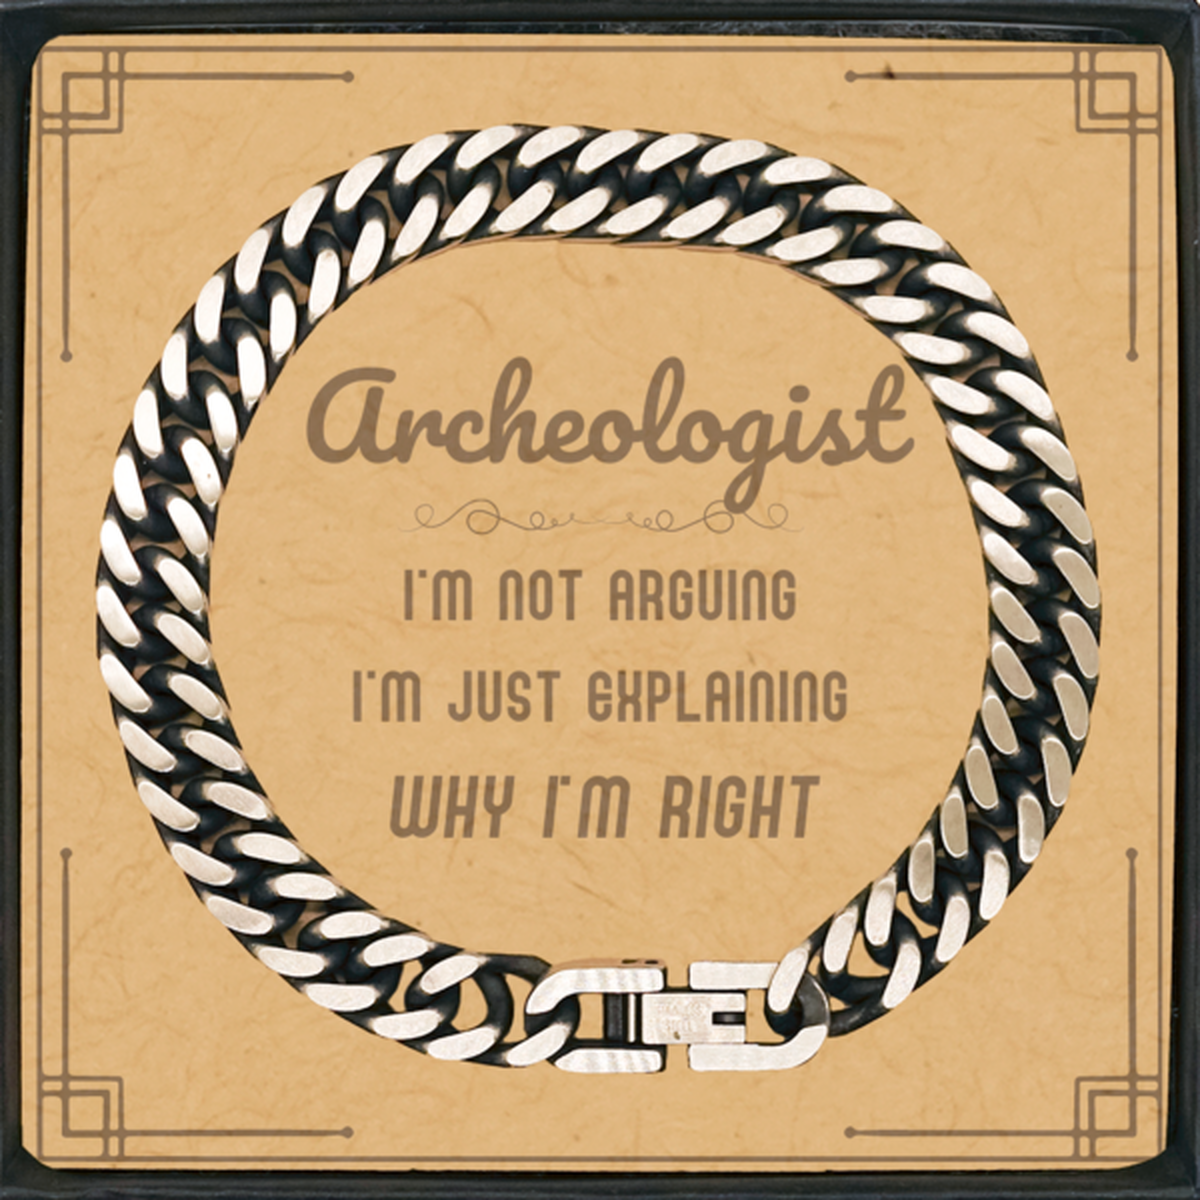 Archeologist I'm not Arguing. I'm Just Explaining Why I'm RIGHT Cuban Link Chain Bracelet, Funny Saying Quote Archeologist Gifts For Archeologist Message Card Graduation Birthday Christmas Gifts for Men Women Coworker